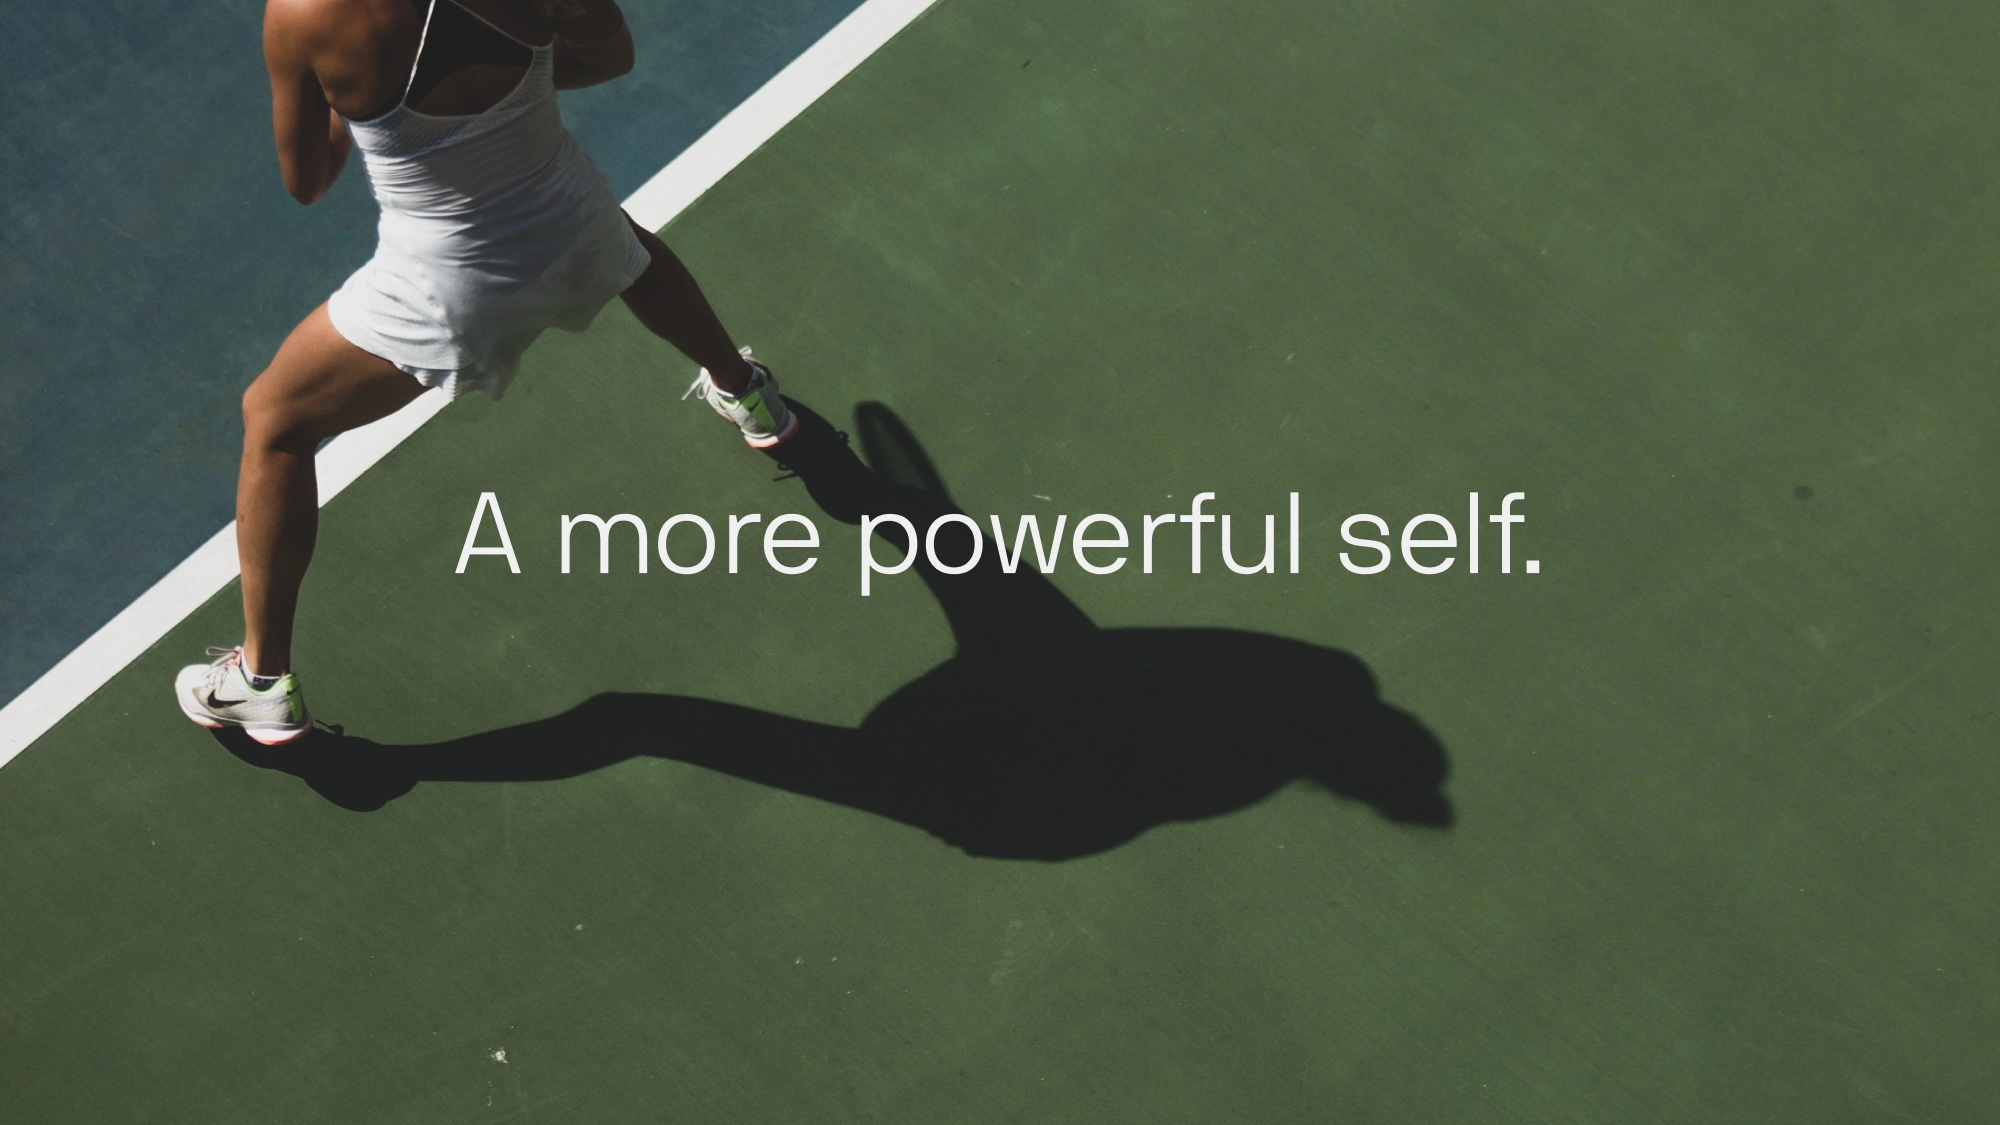 Tennis player with tagline 'A more powerful self.'